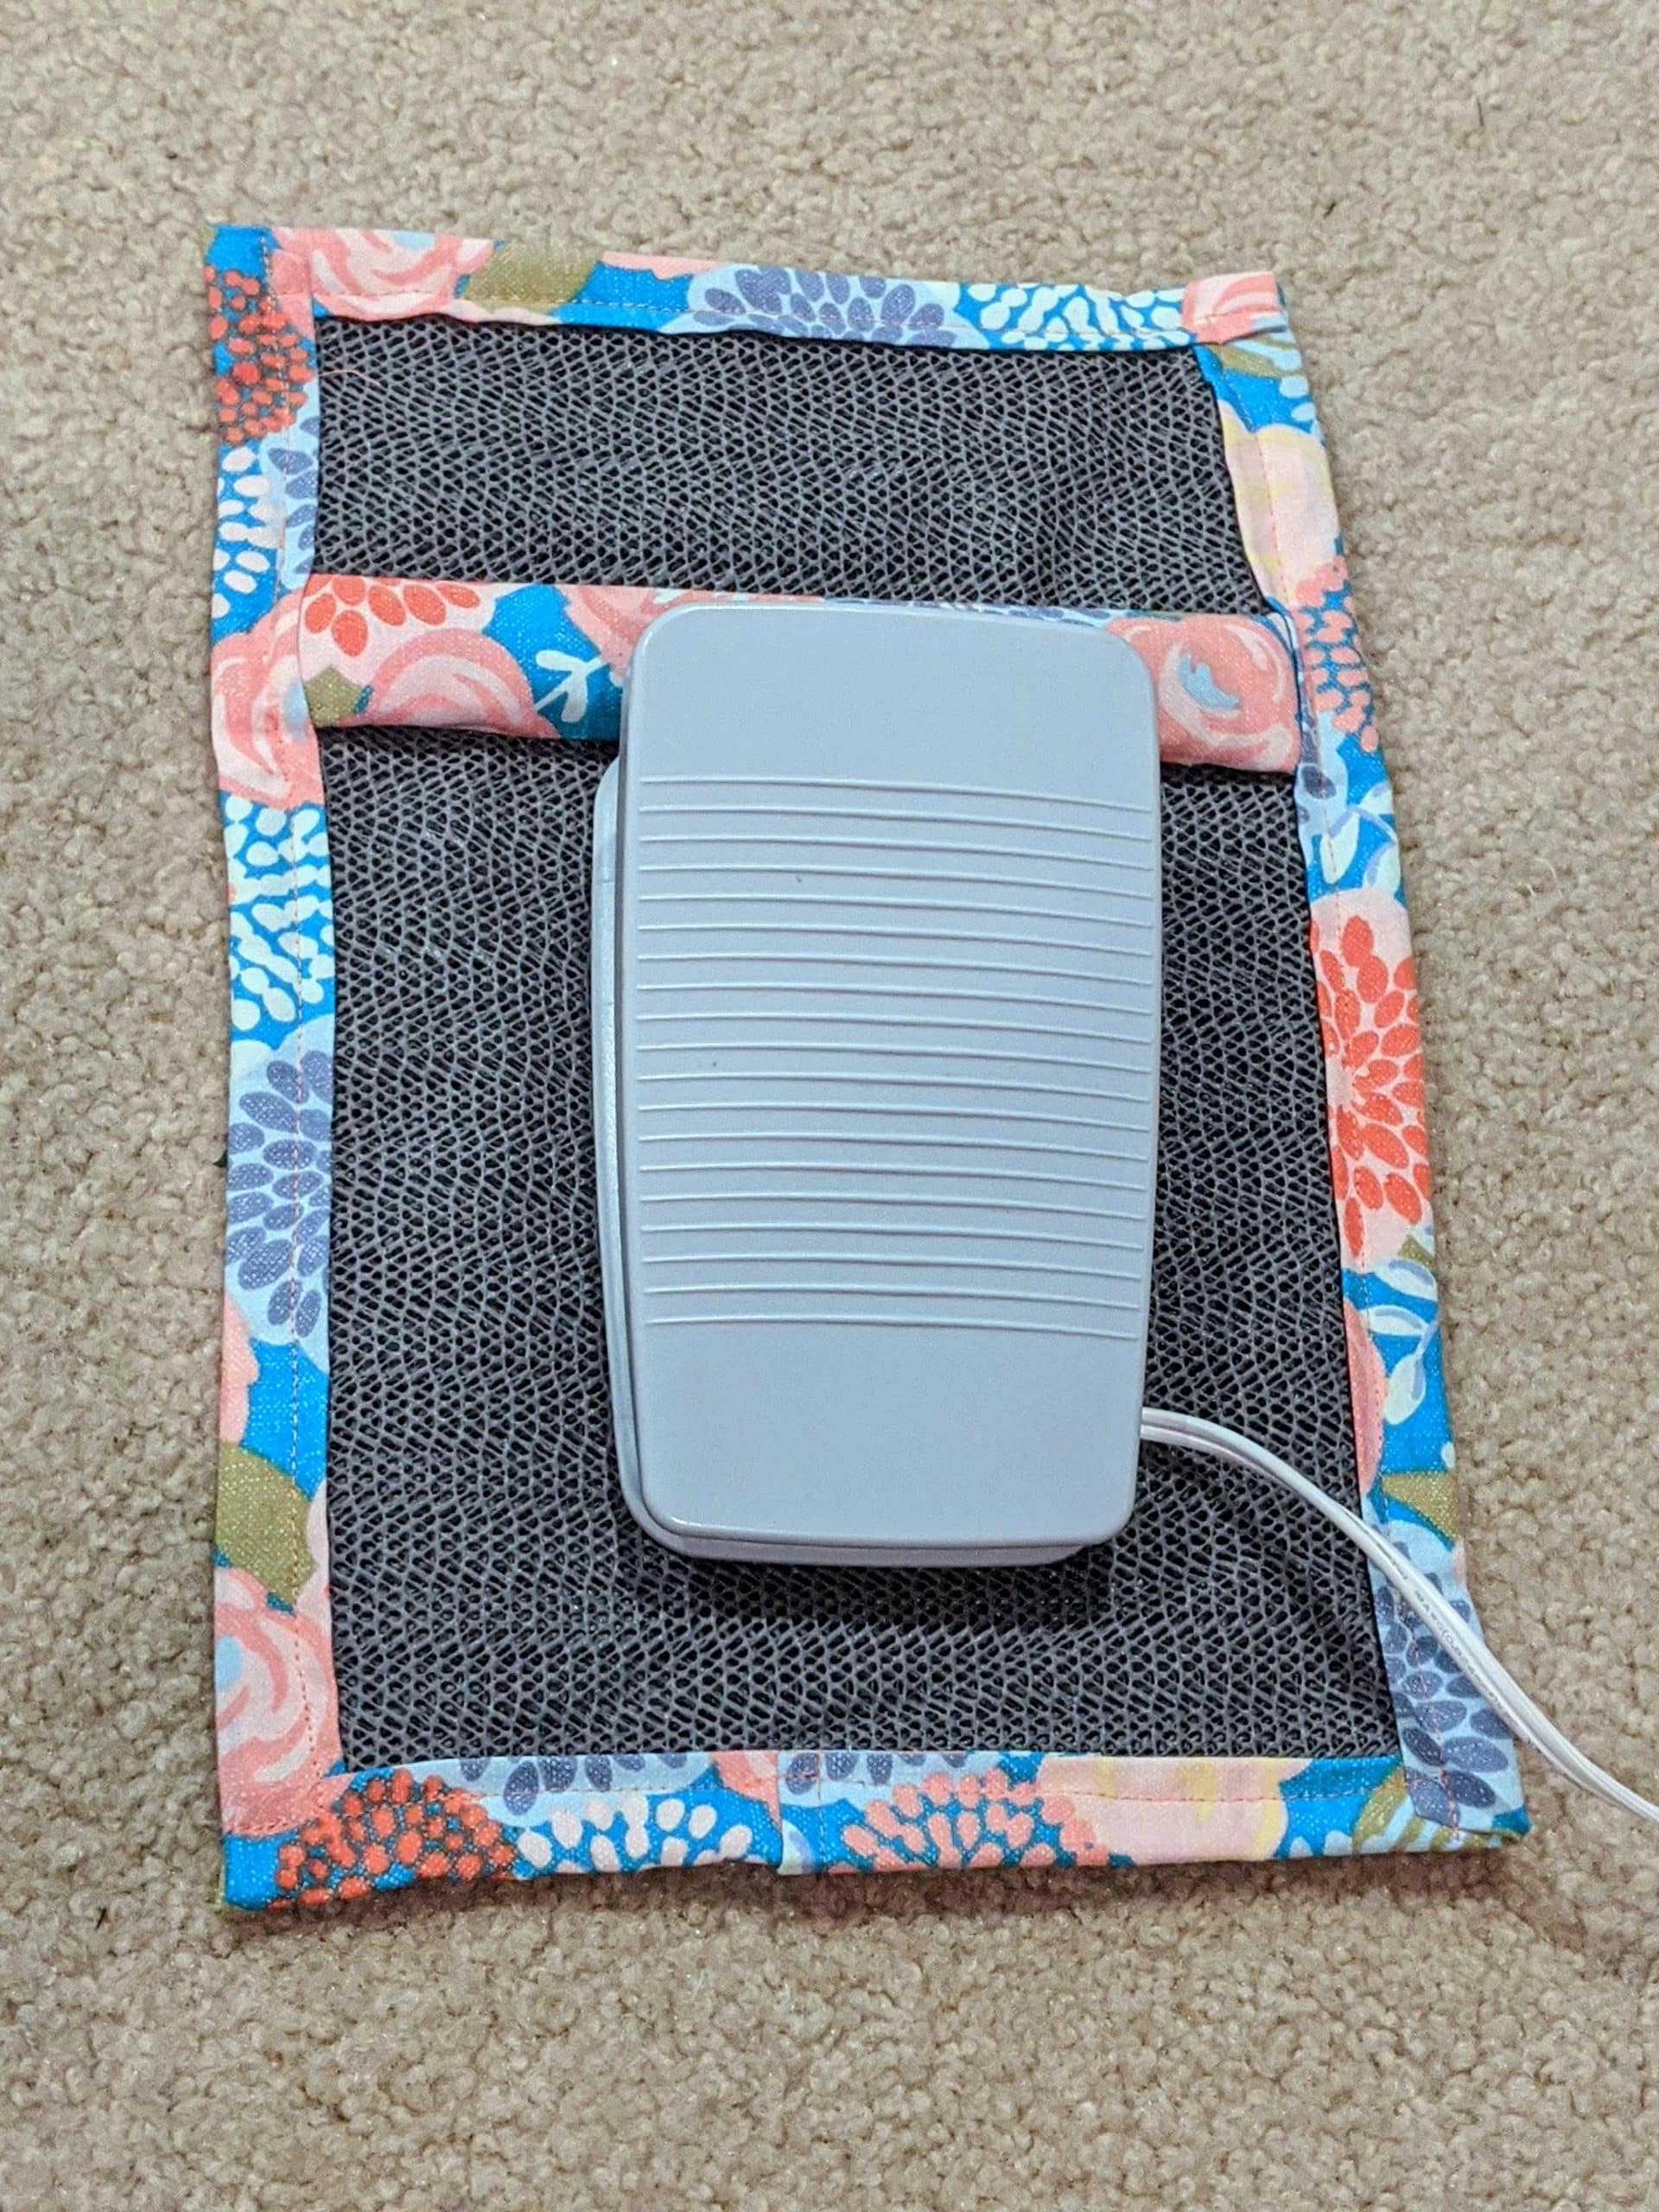 DIY Non-slip Pedal Pad - 5 out of 4 Patterns